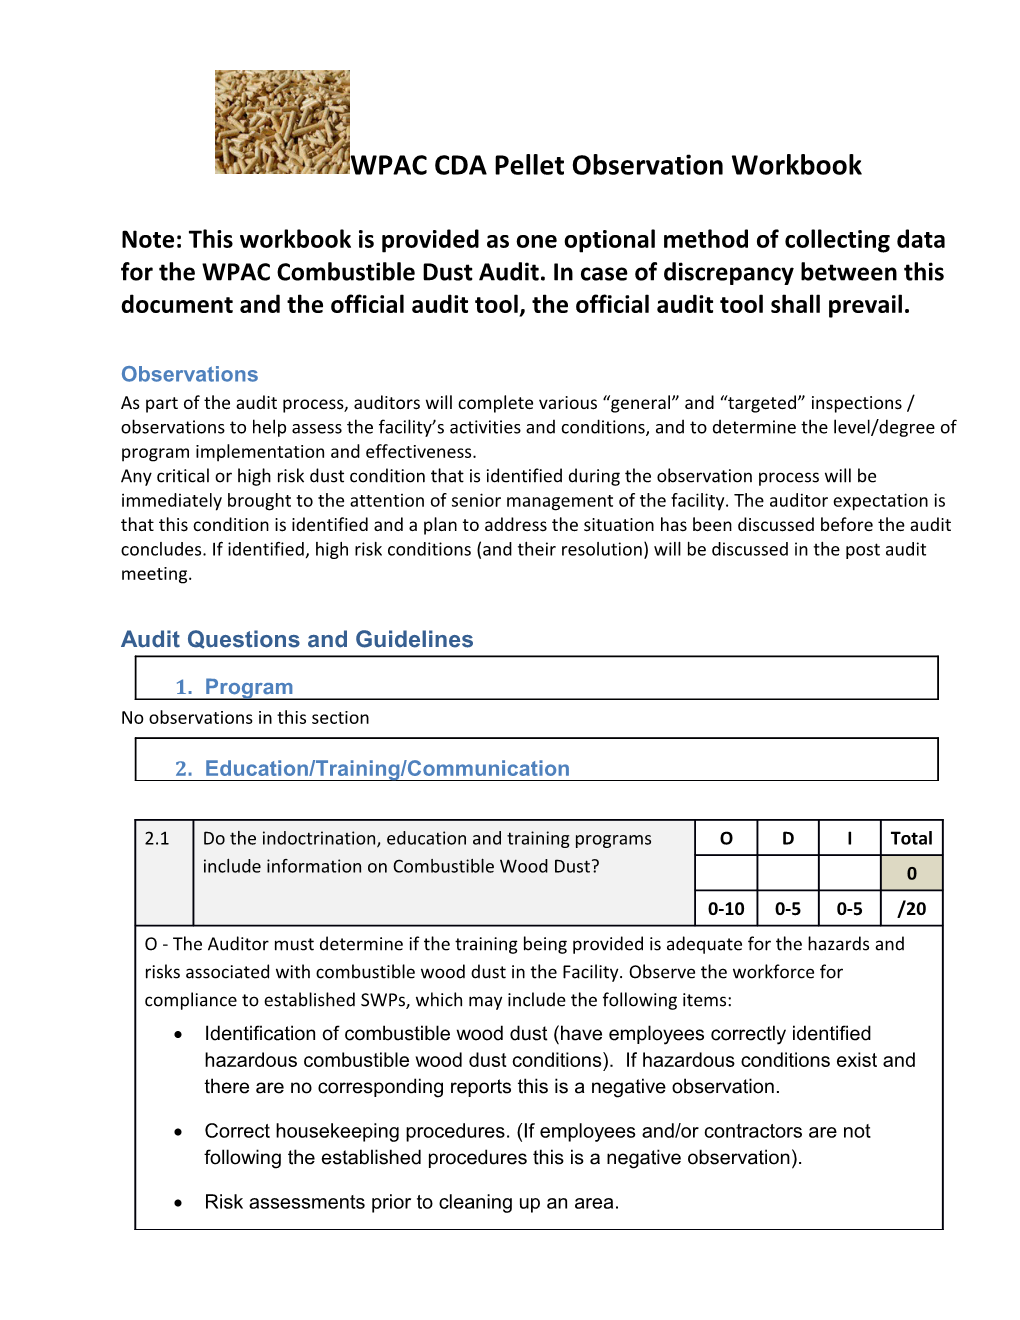 Note: This Workbook Is Provided As One Optional Method of Collecting Data for the WPAC